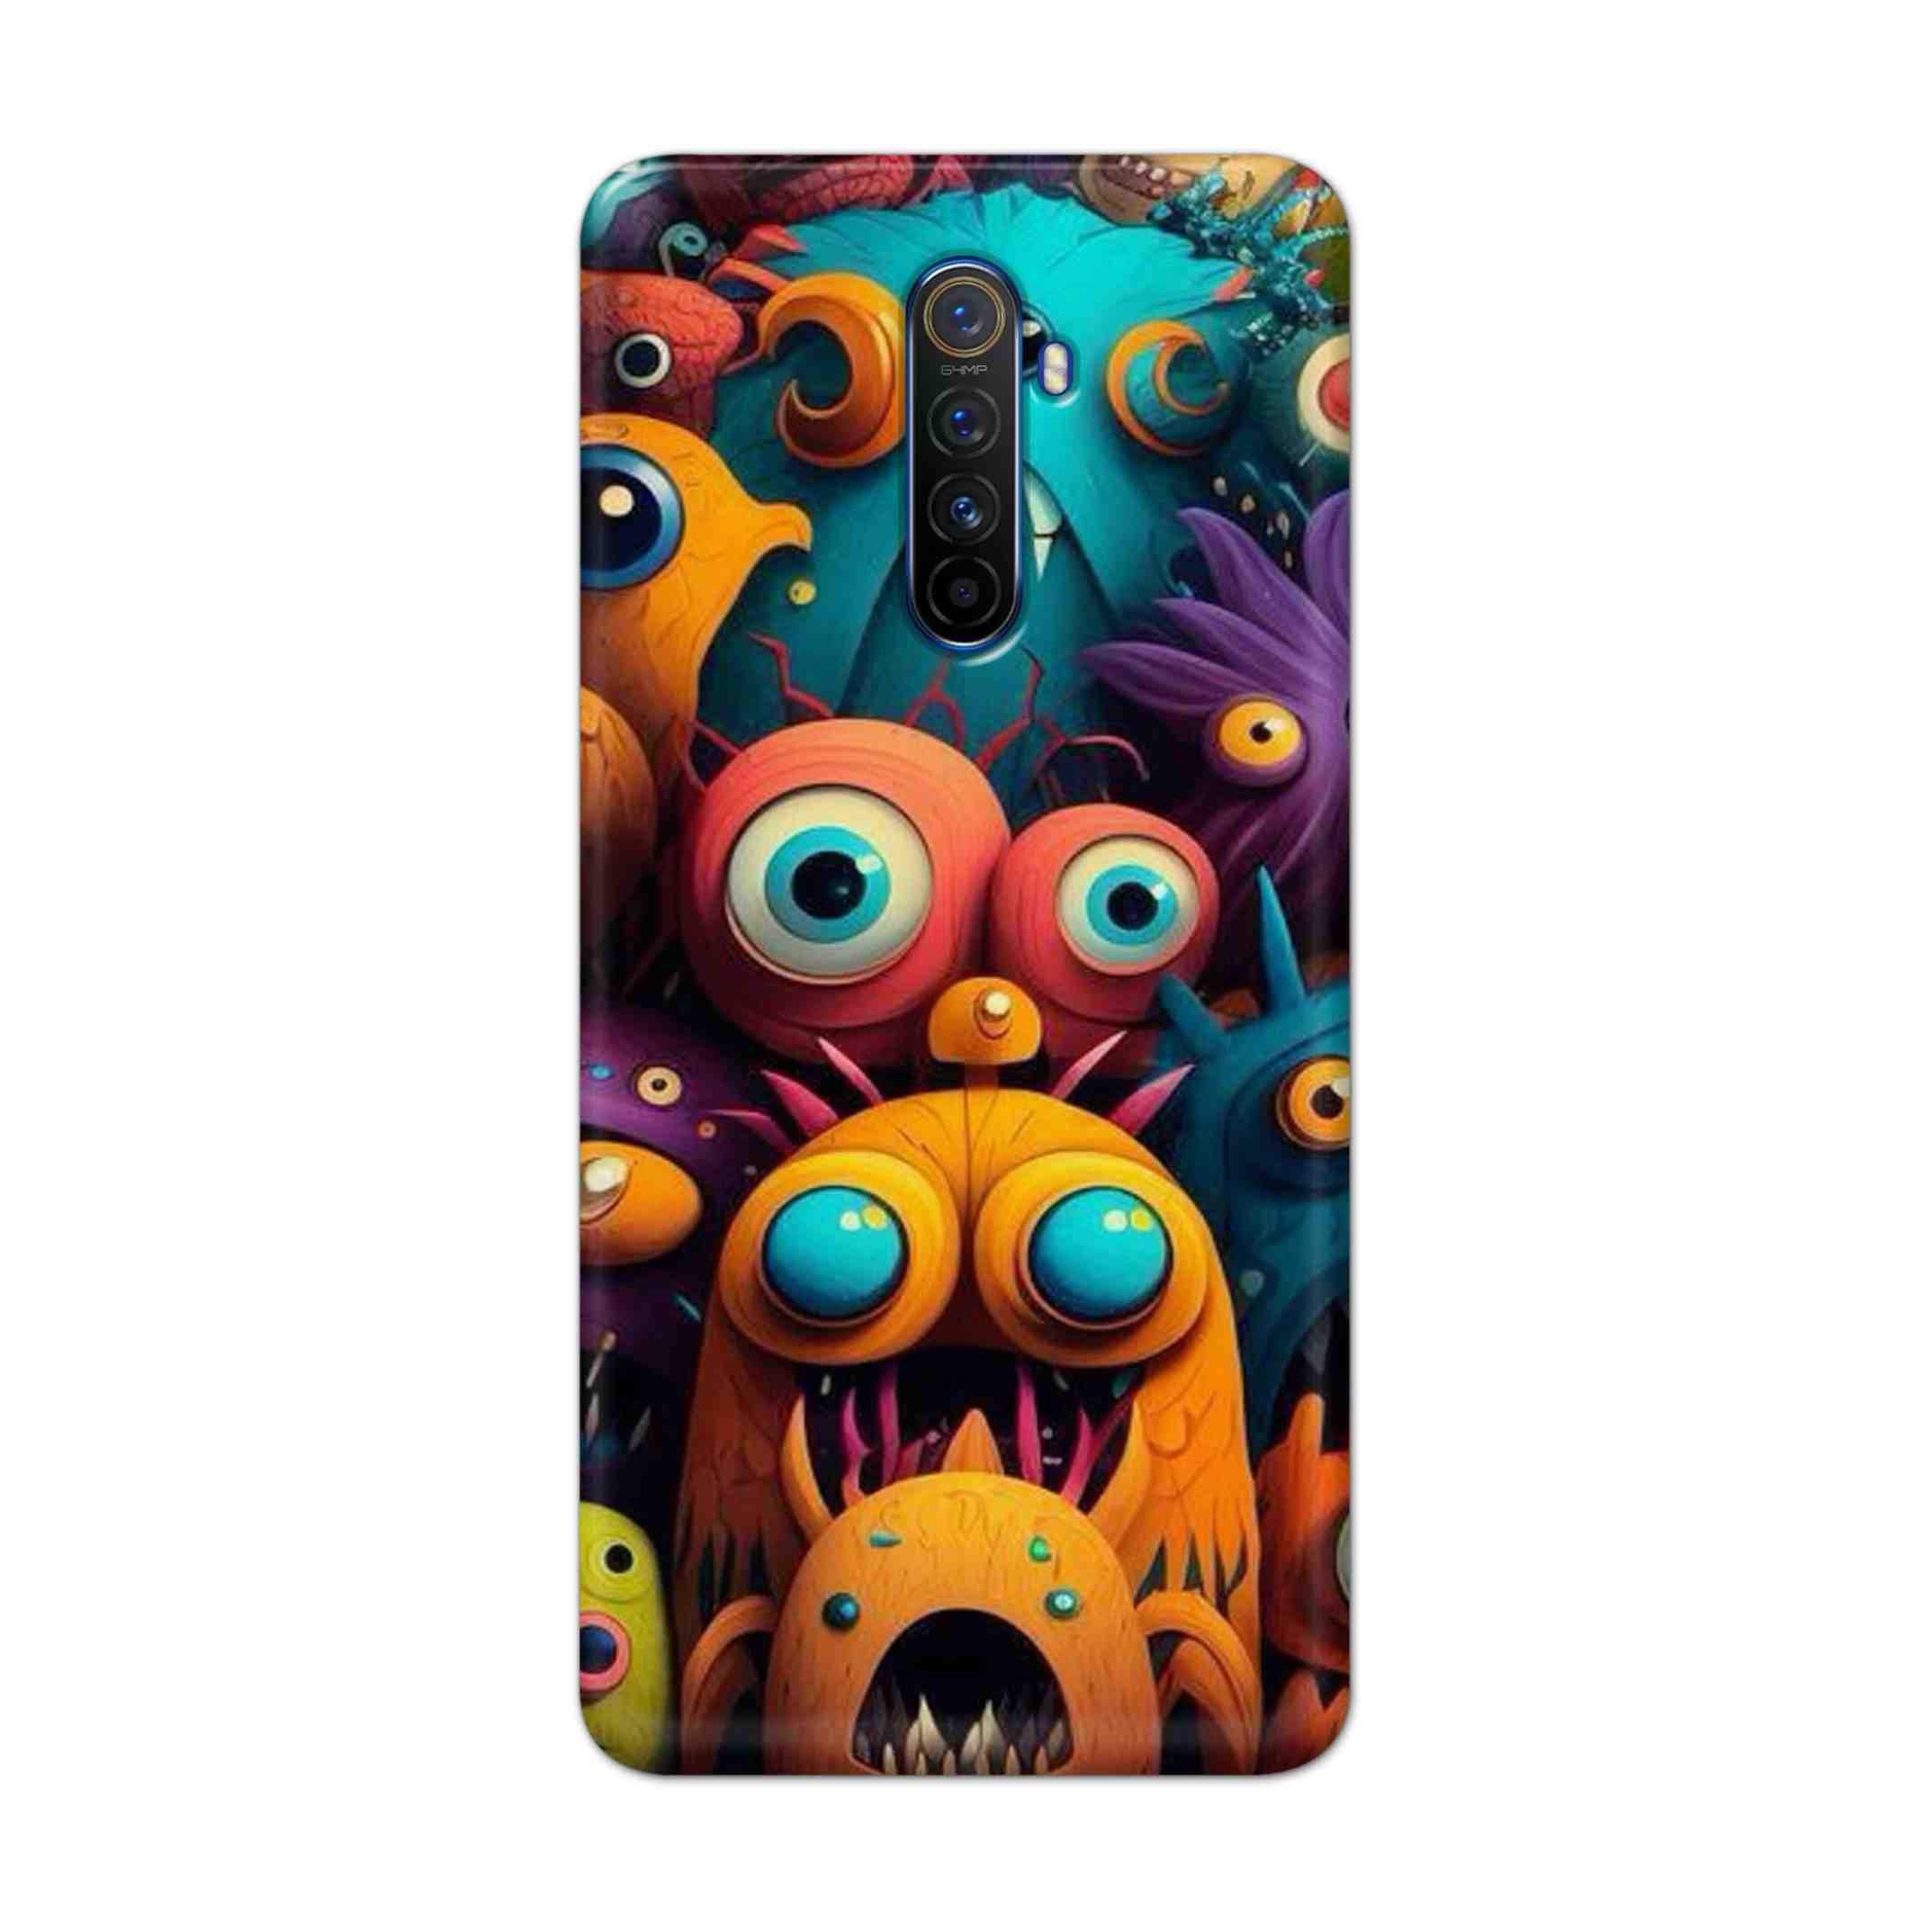 Buy Zombie Hard Back Mobile Phone Case Cover For Realme X2 Pro Online